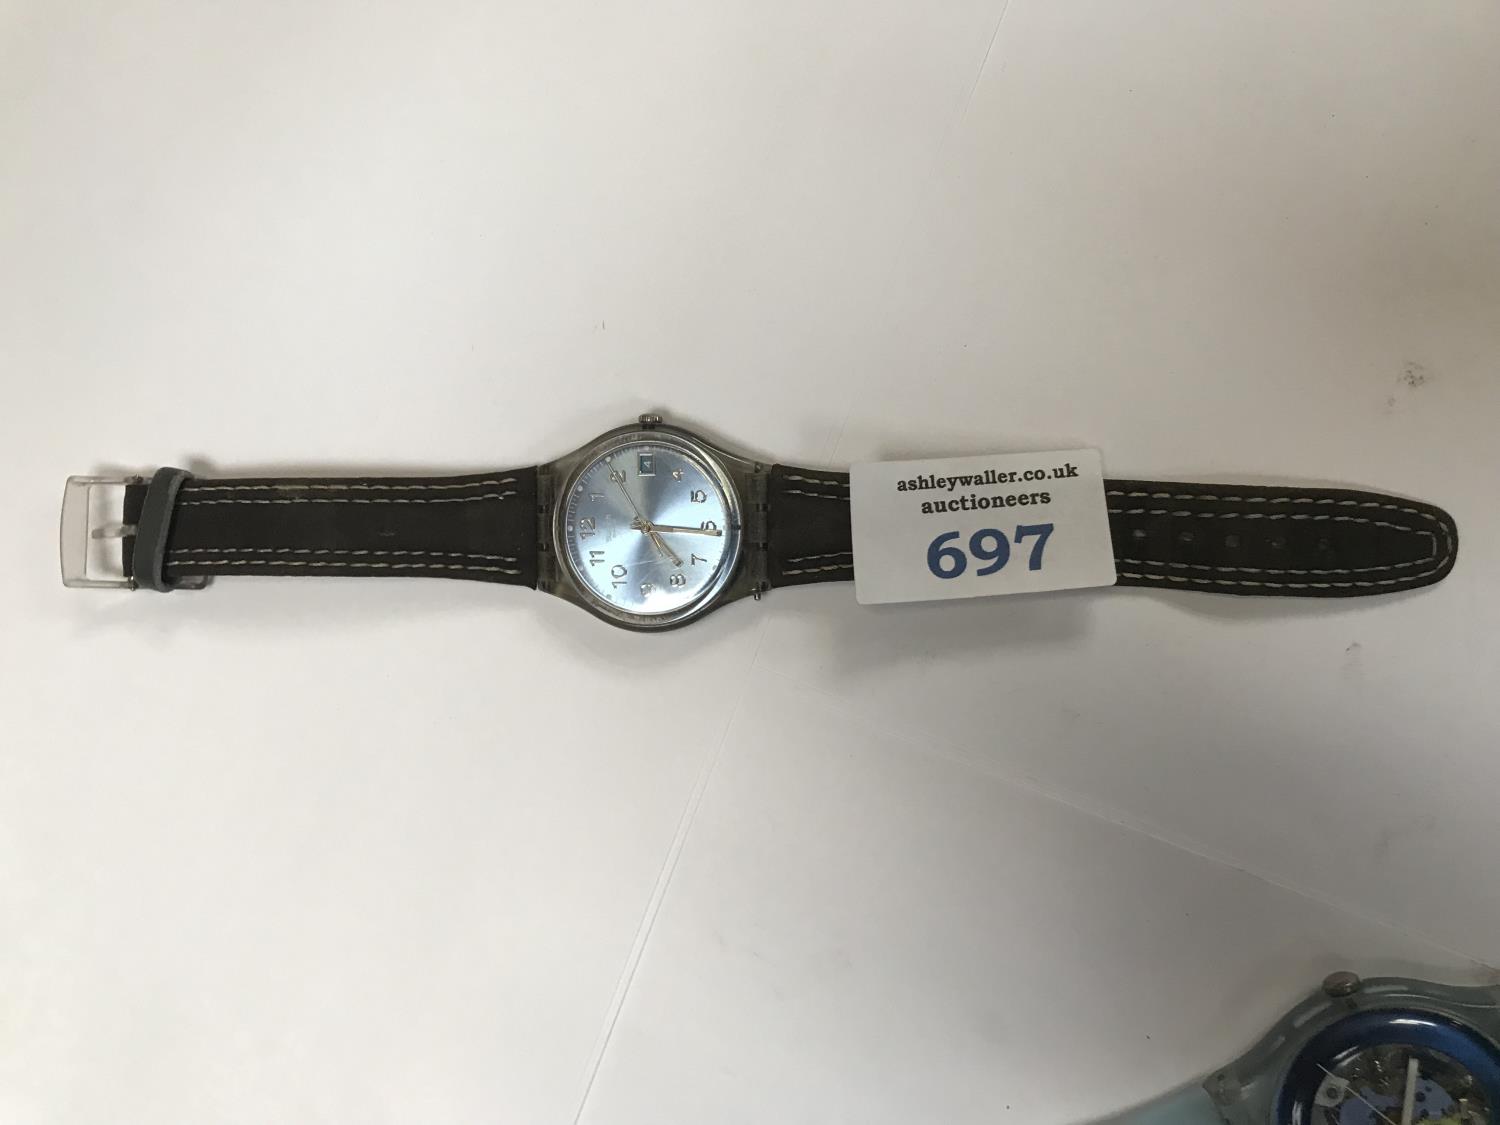 A SWATCH WATCH WITH A BLUE FACE AND A BROWN SUEDE STRAP.